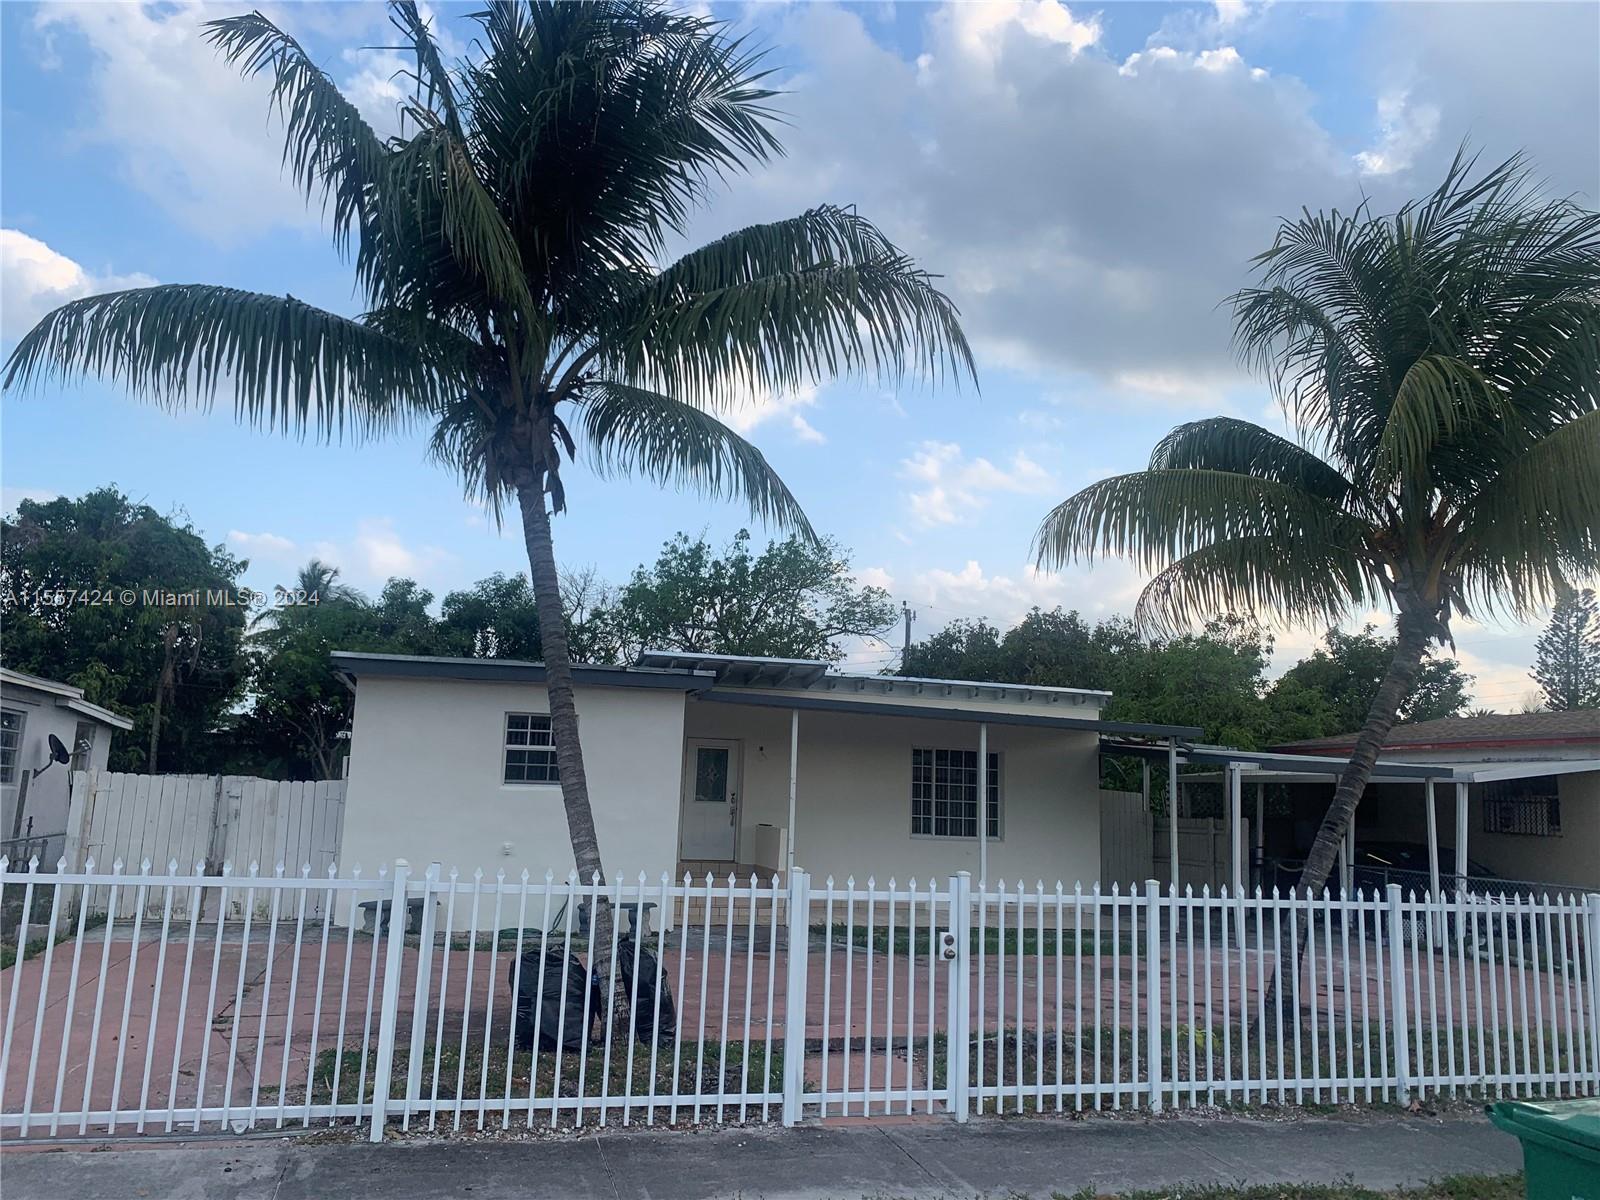 Photo of 1050 NW 116th Ter in Miami, FL